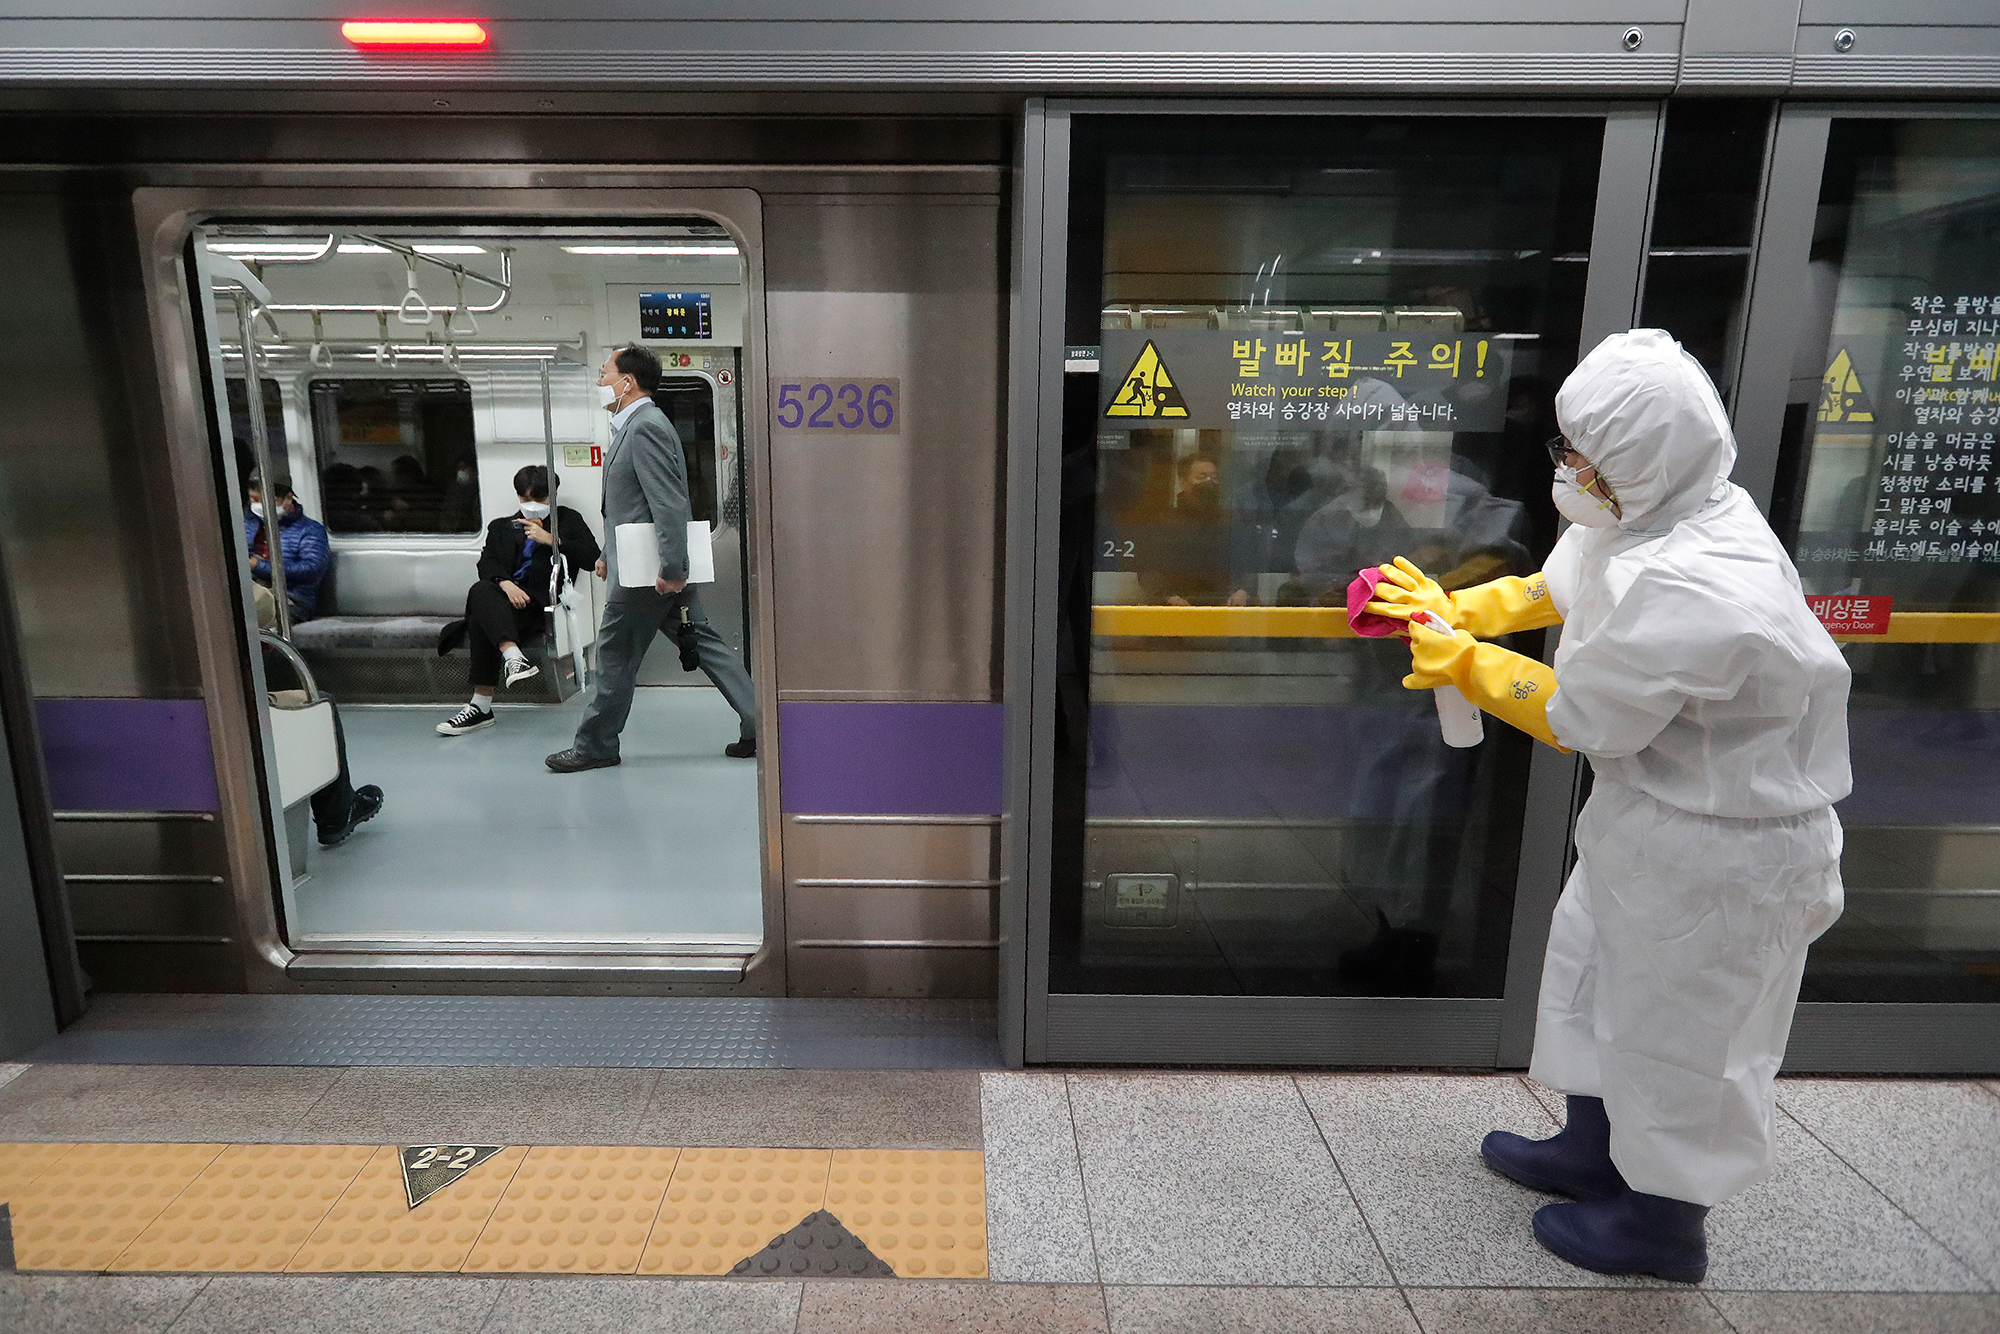 A worker wearing protective gears disinfects a door as a precaution against the new coronavirus at a subway station in Seoul, South Korea, Friday, February 28.